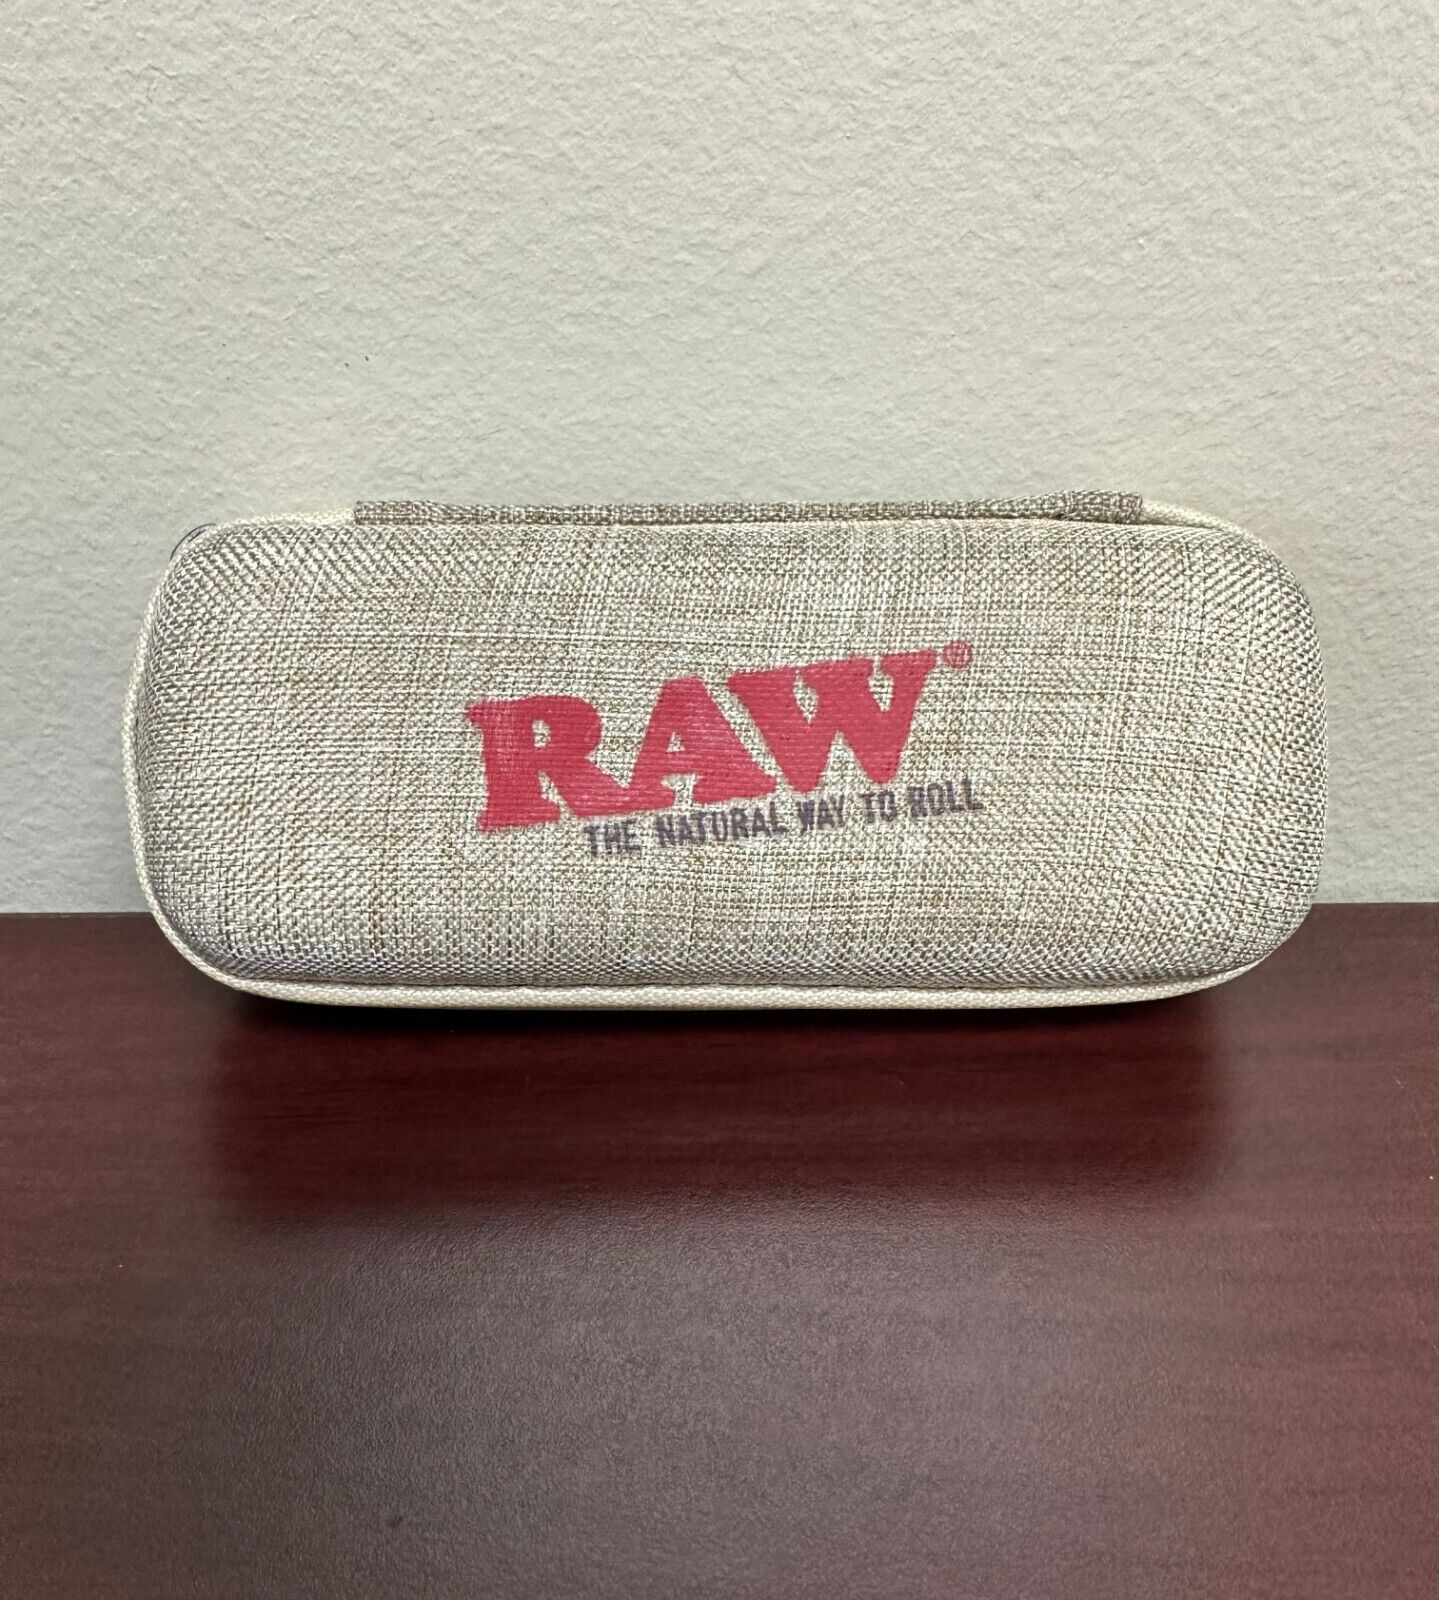 RAW Pre Rawlet Cone Wallet Zipper Case Storage Pouch Container